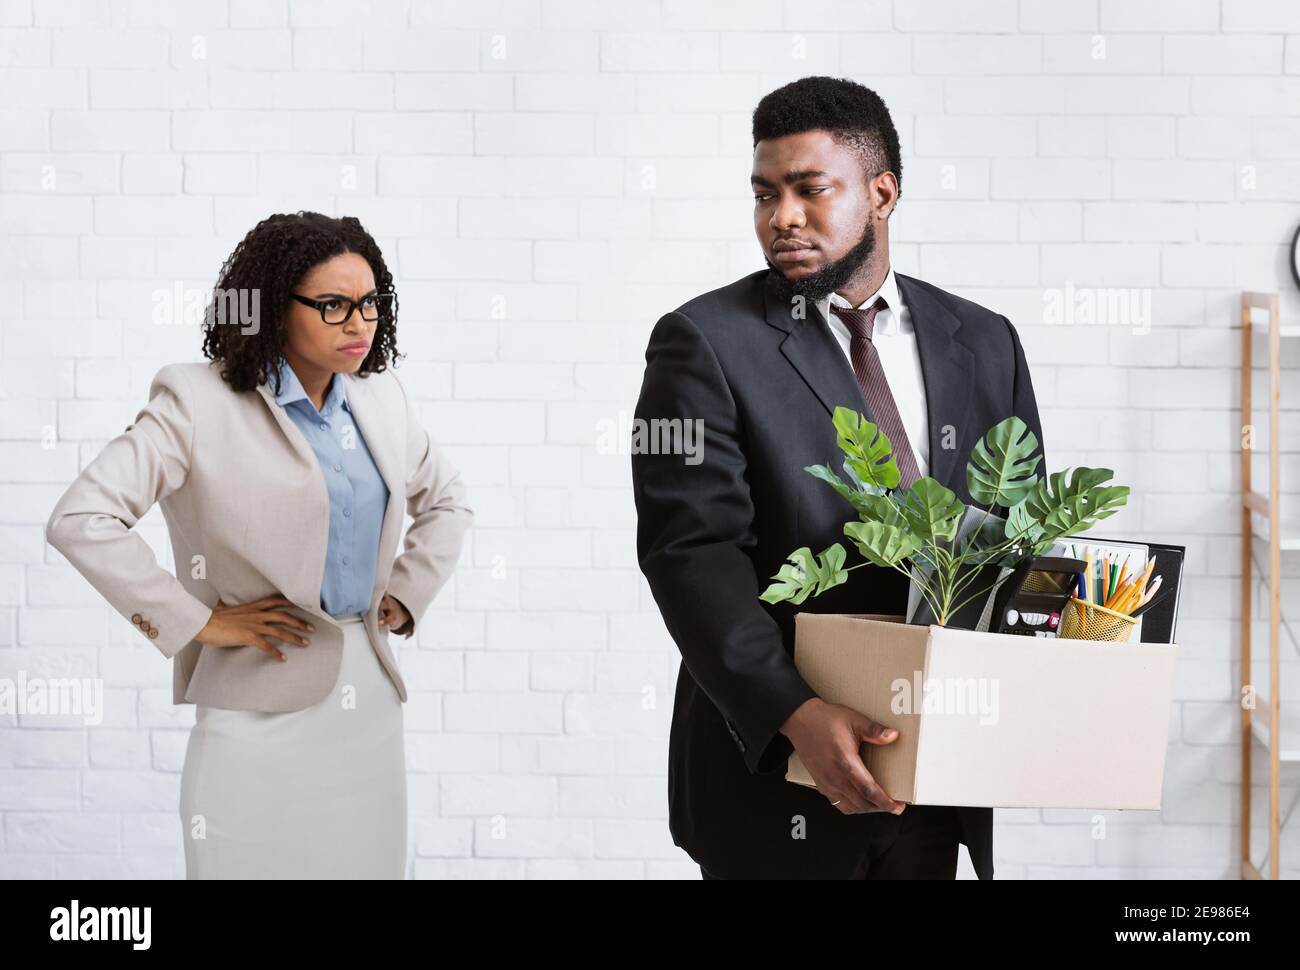 Angry black lady boss firing young male employee at office. Financial crisis and unemployment concept Stock Photo